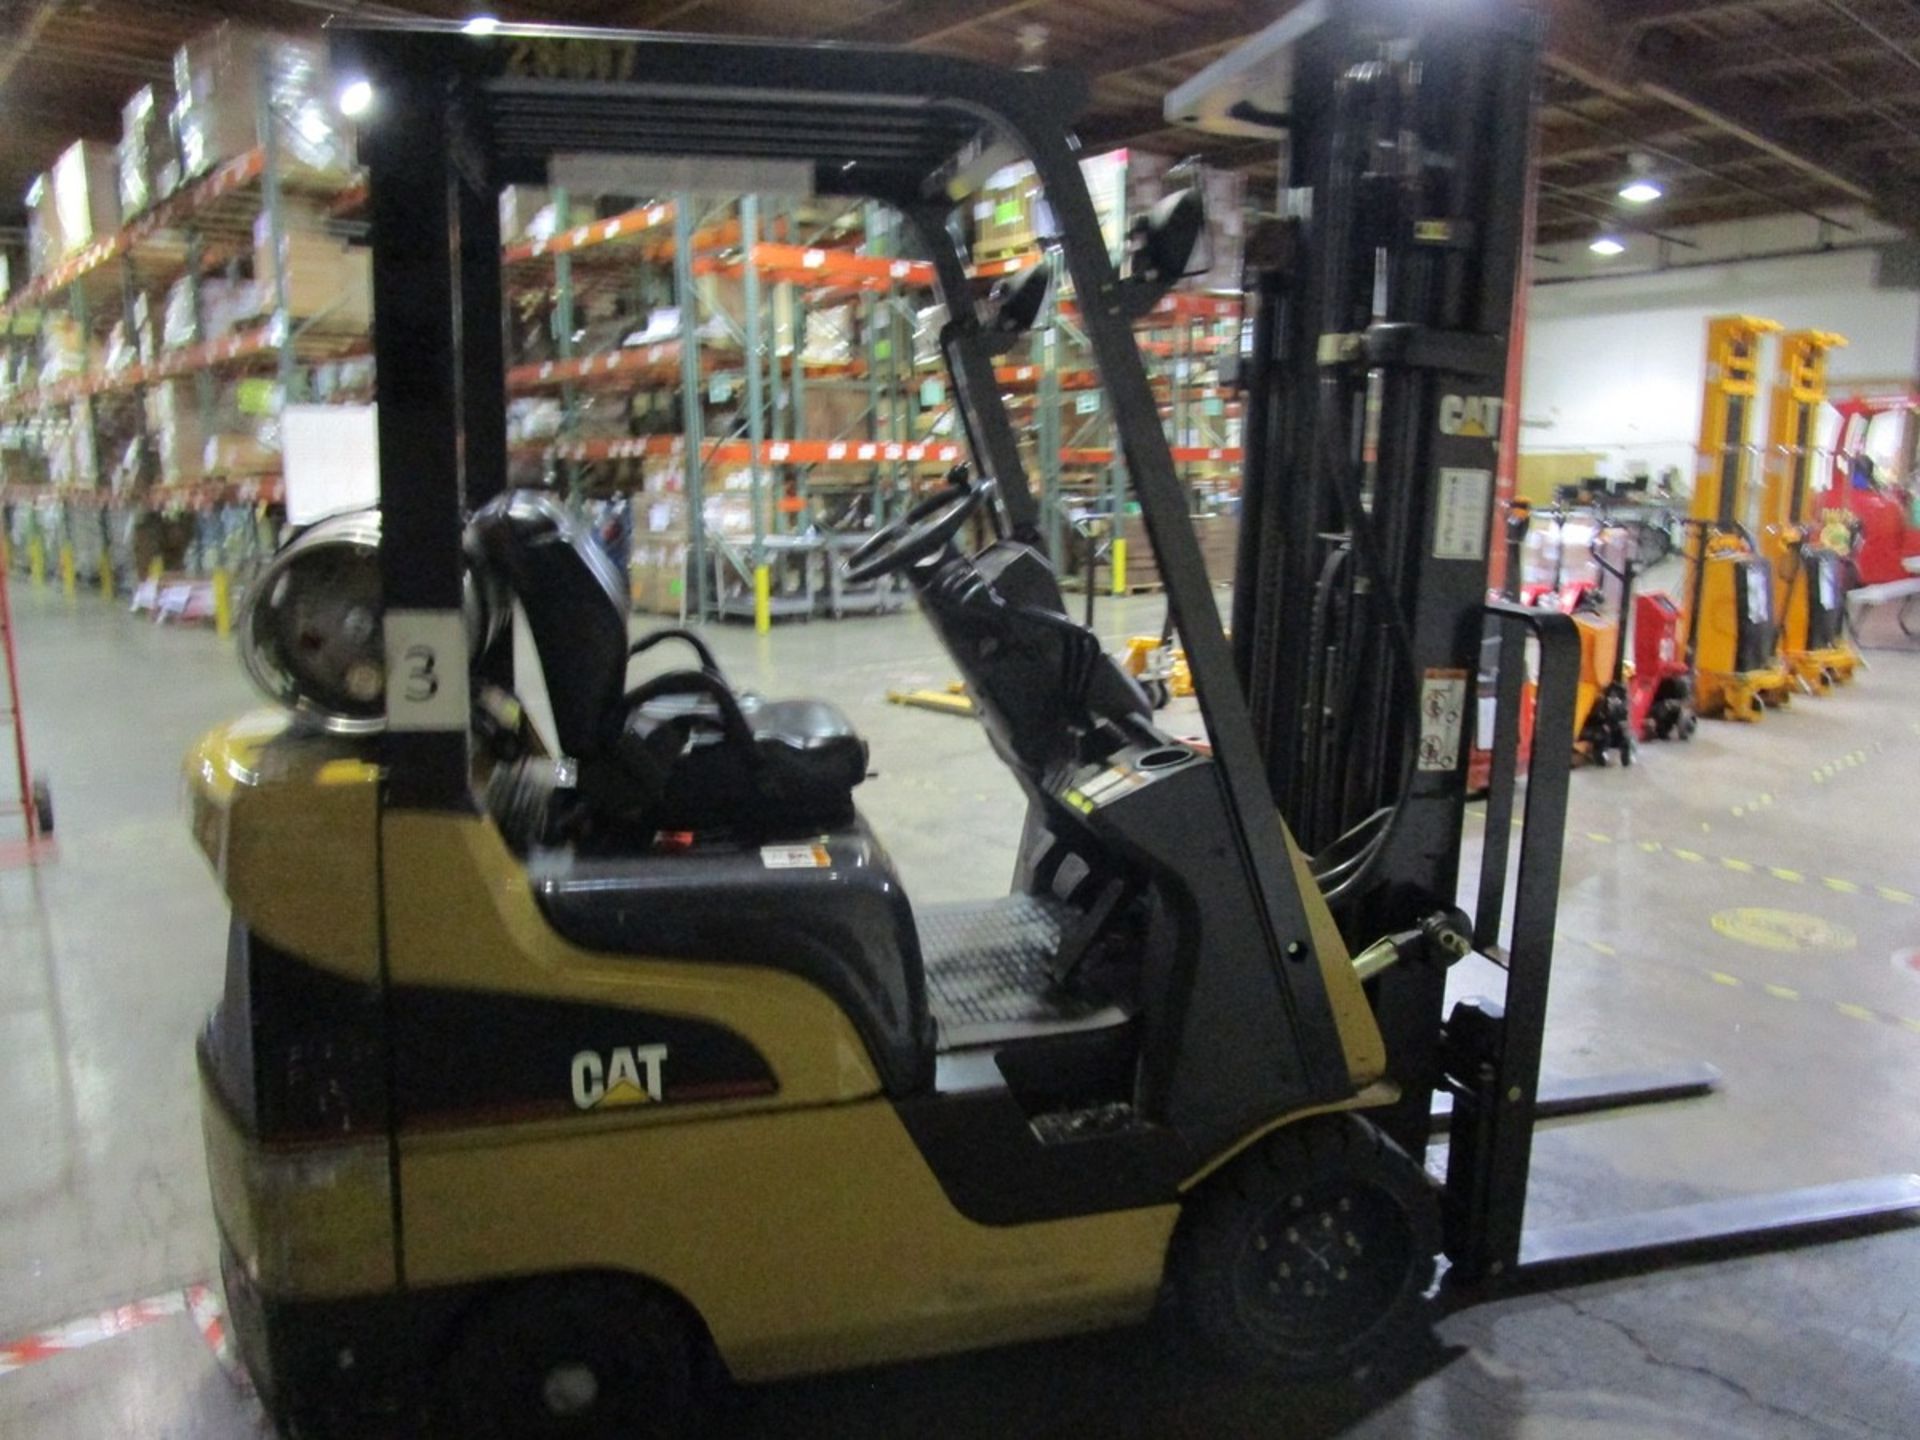 Cat CC4000 LPG Forklift s/n AT81F50079 (Delivery - 4/3/20), 1700 Hours, 3,125 #, 200 | Rig Fee: $100 - Image 2 of 7